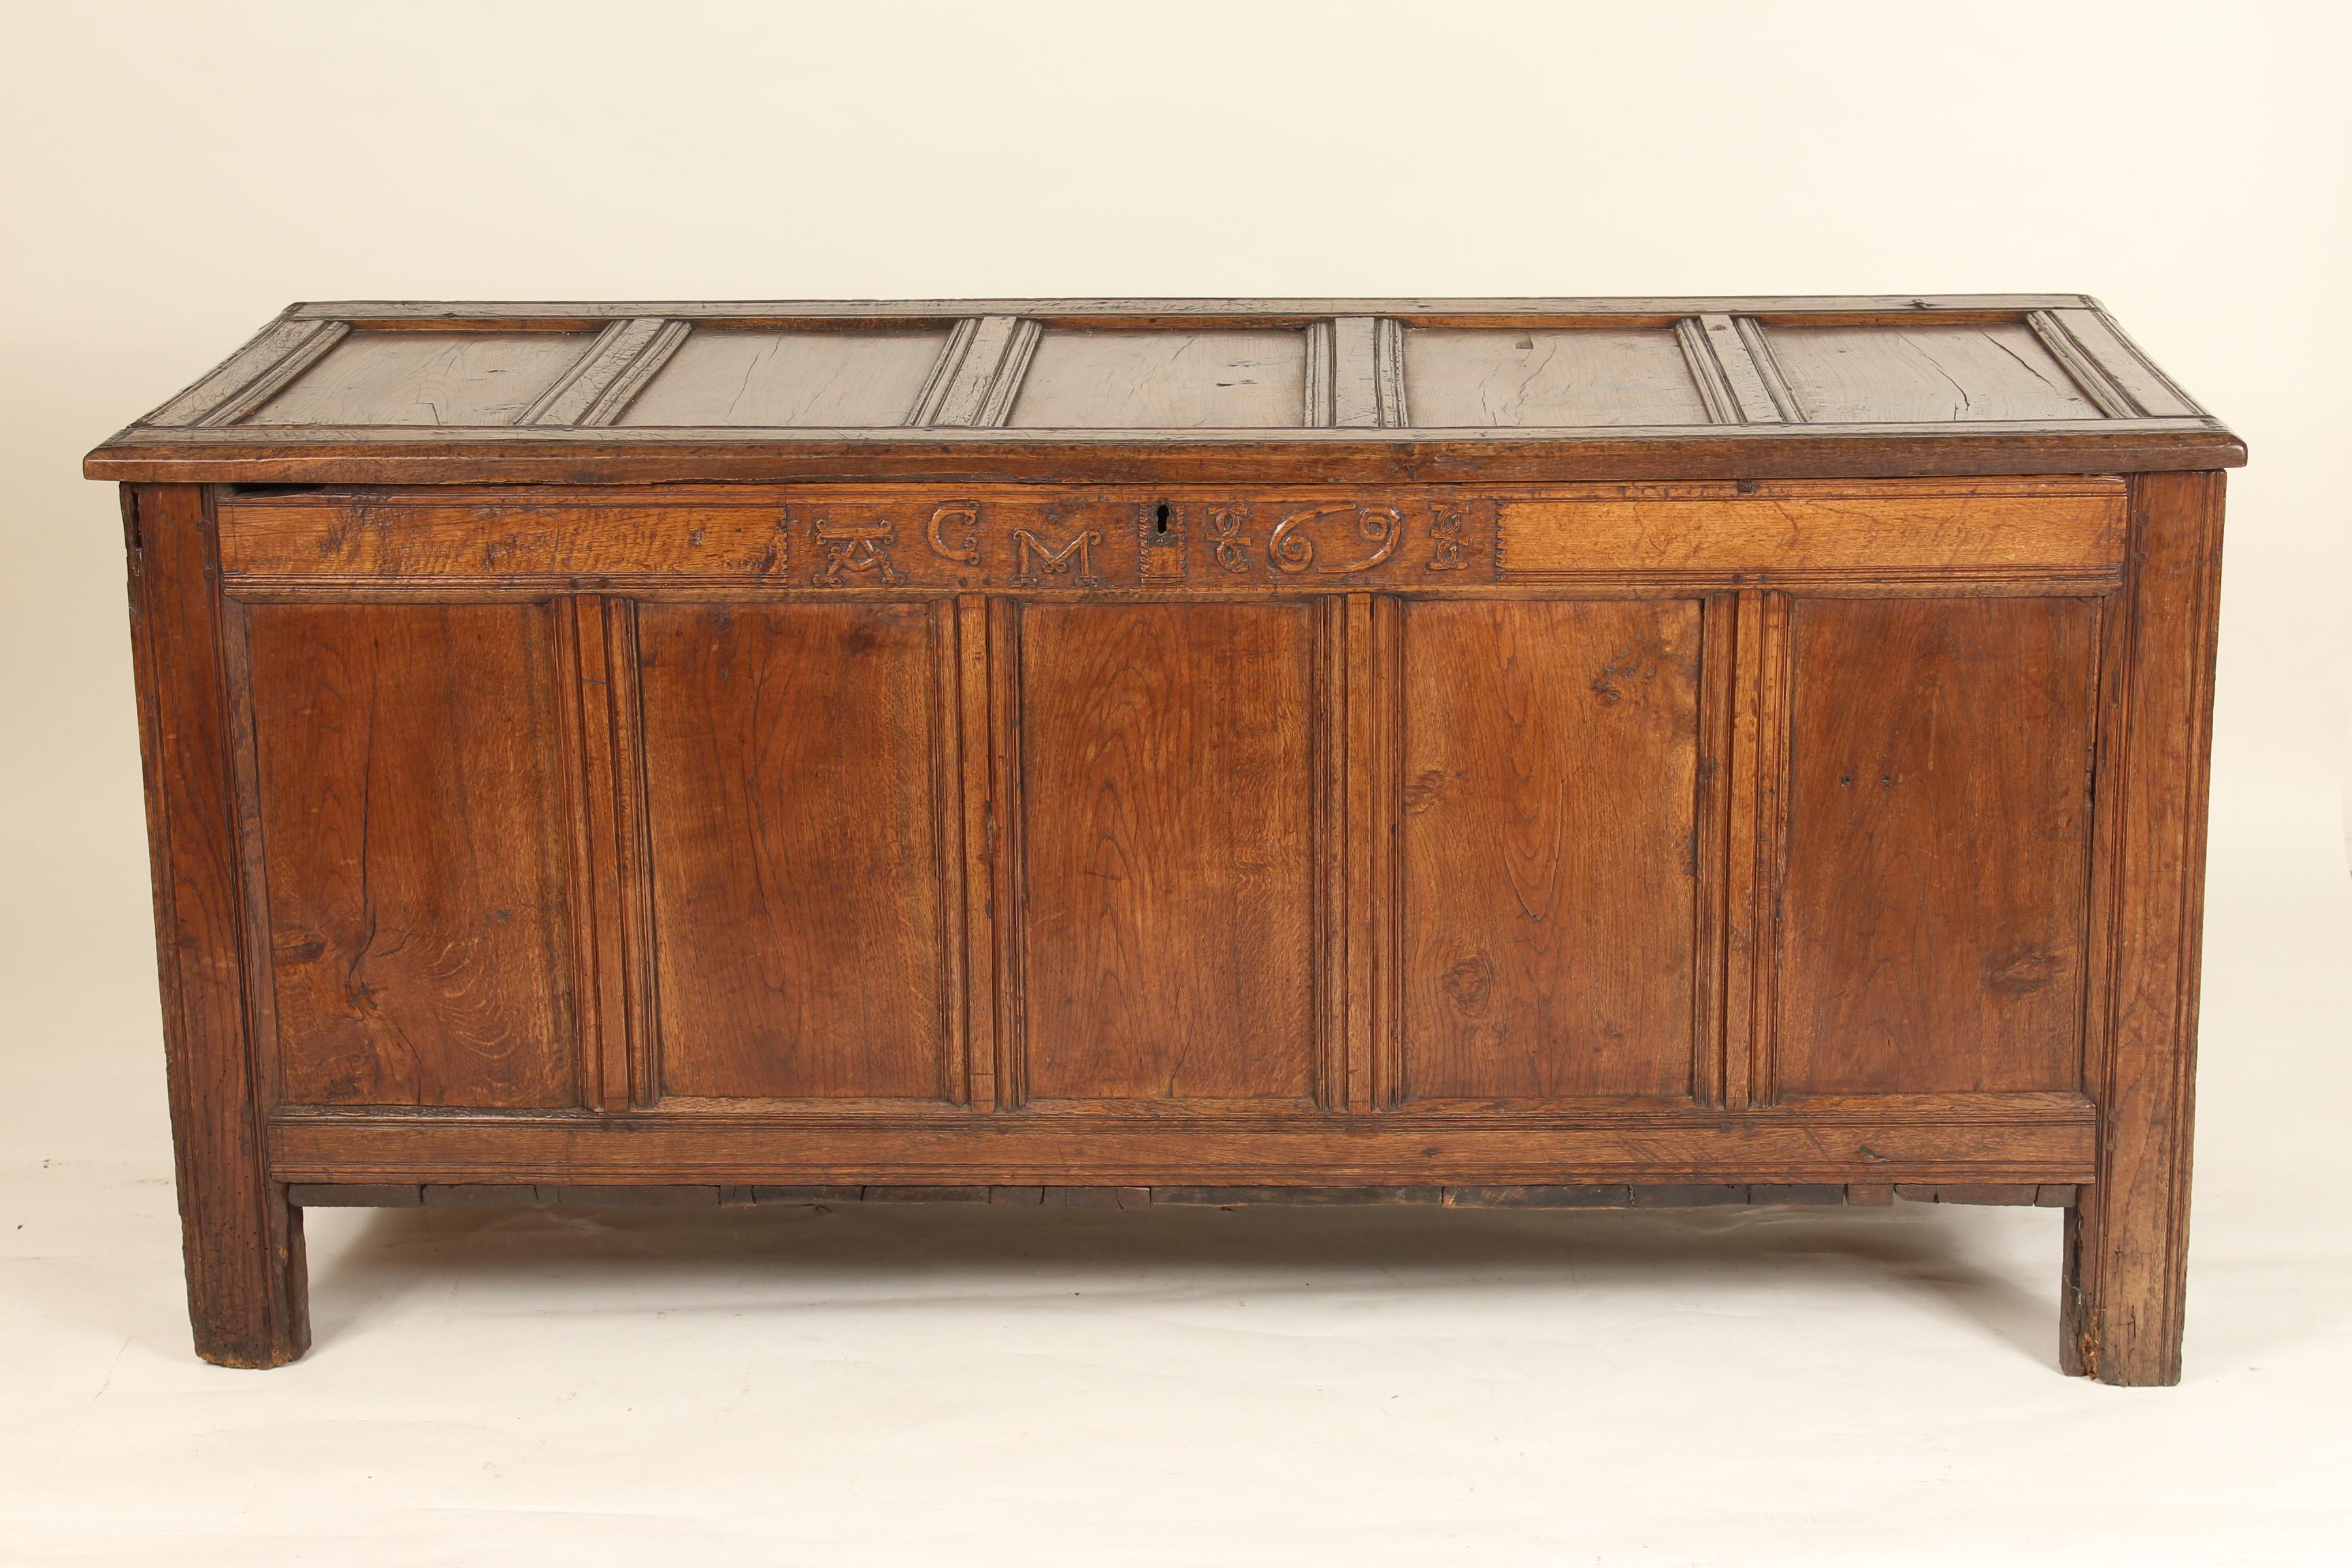 Large scale antique English oak trunk, 18th century. With carved initials and date numbers CM and 69 for 1769.